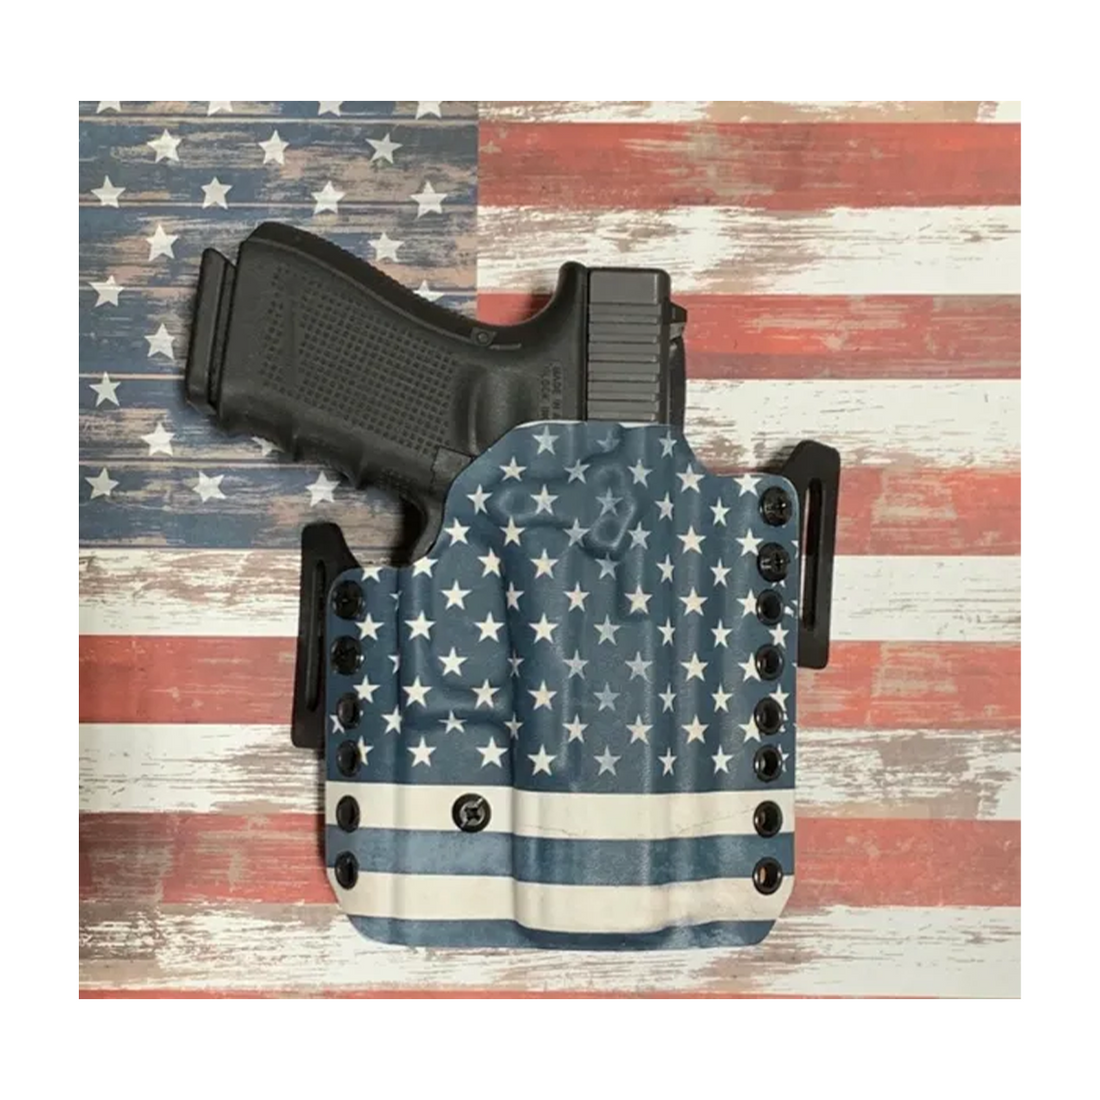 Polymer 80 OWB Holsters